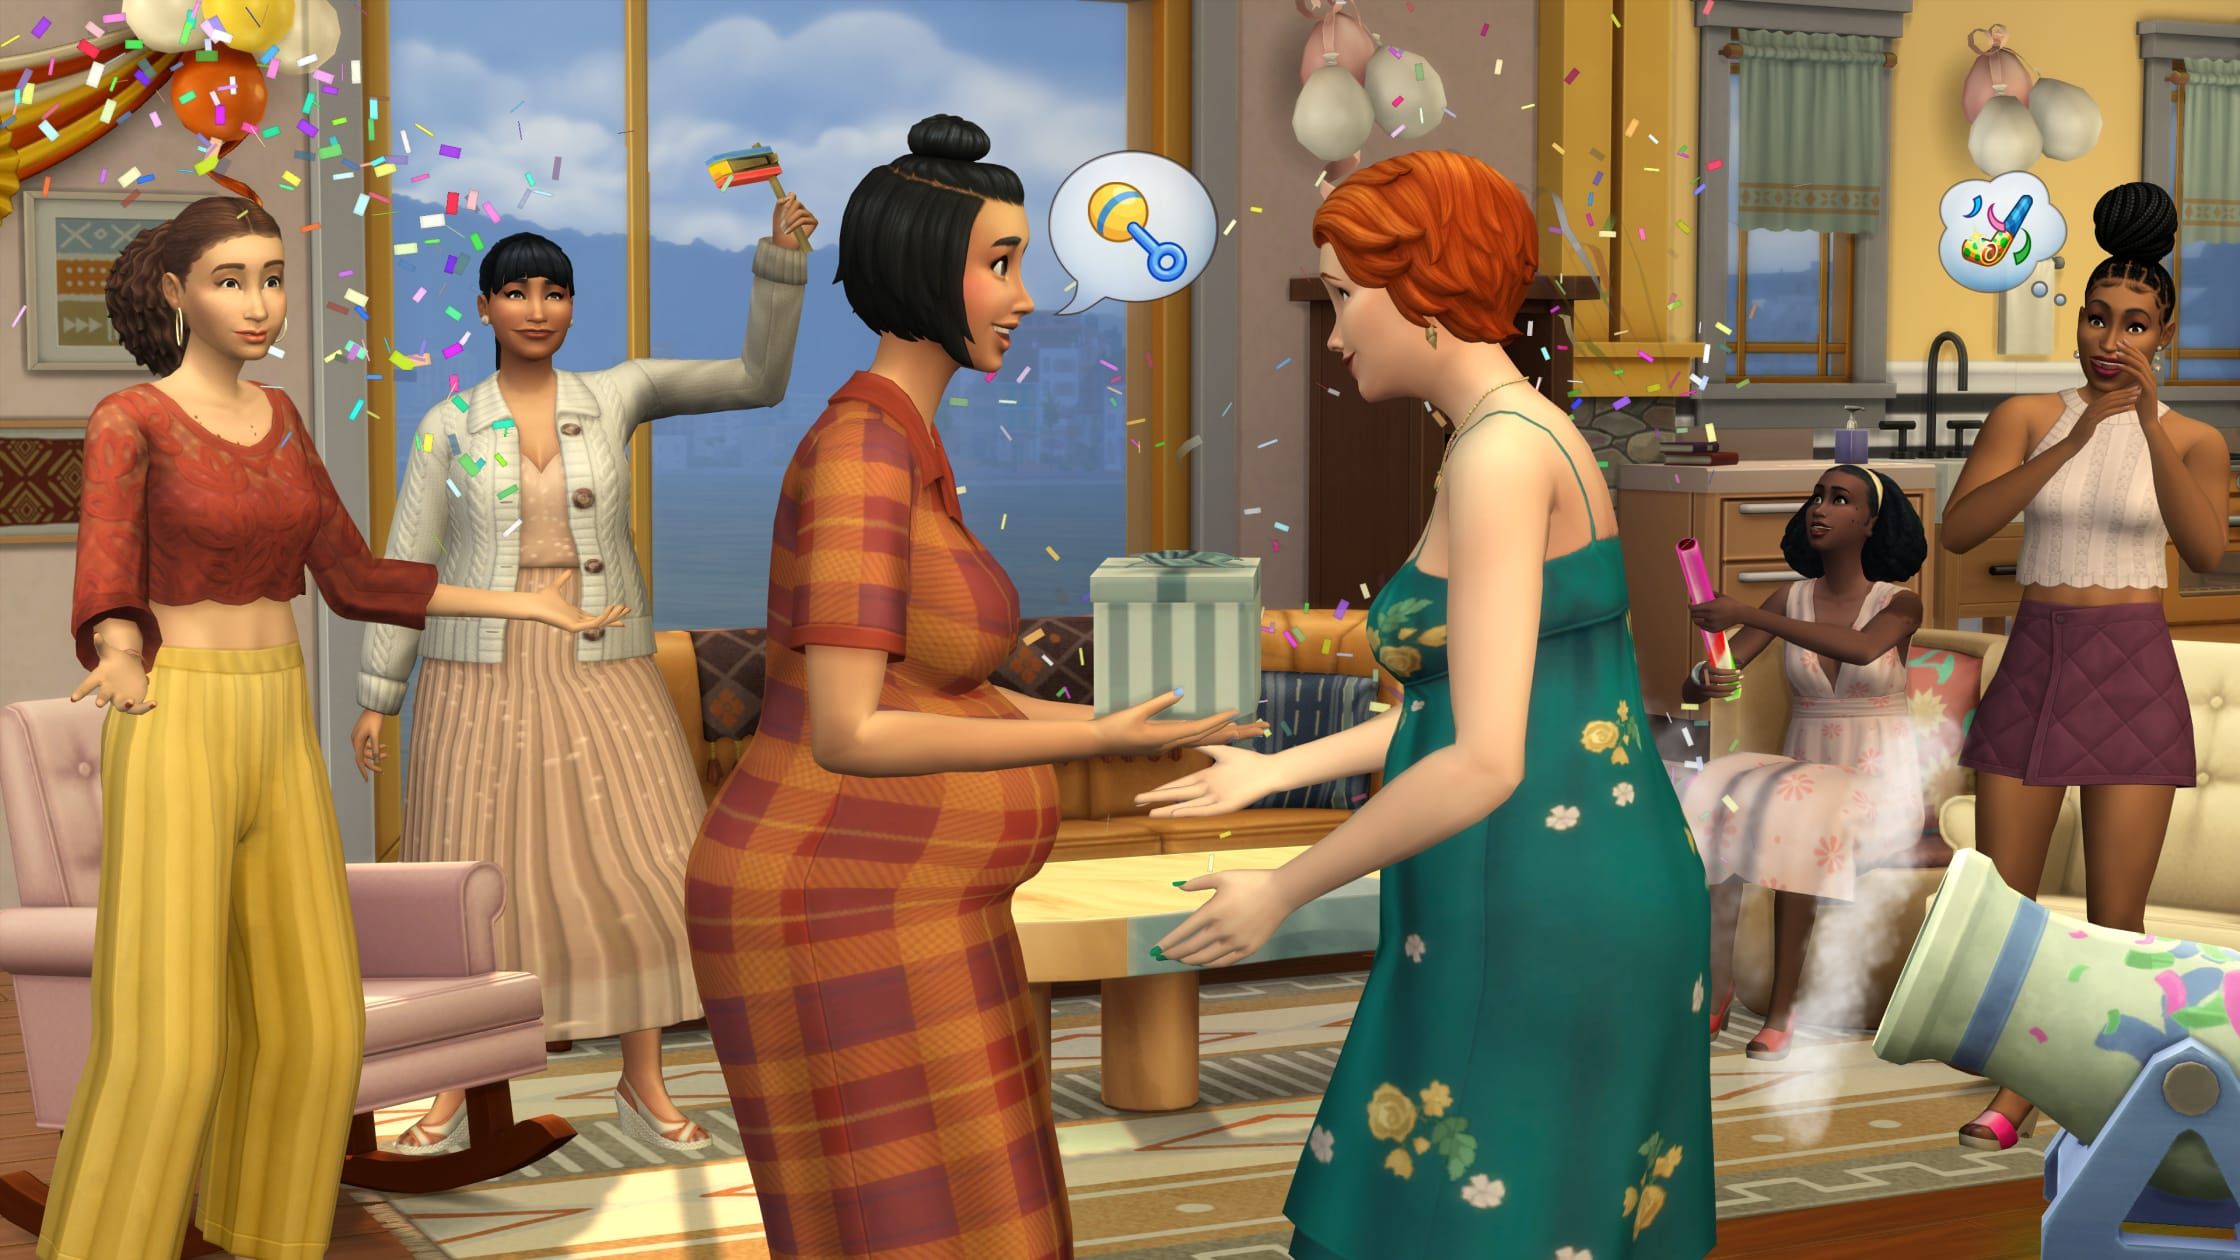 Sims 4 Baby Shower event showing a pregnant woman talking to another Sim.